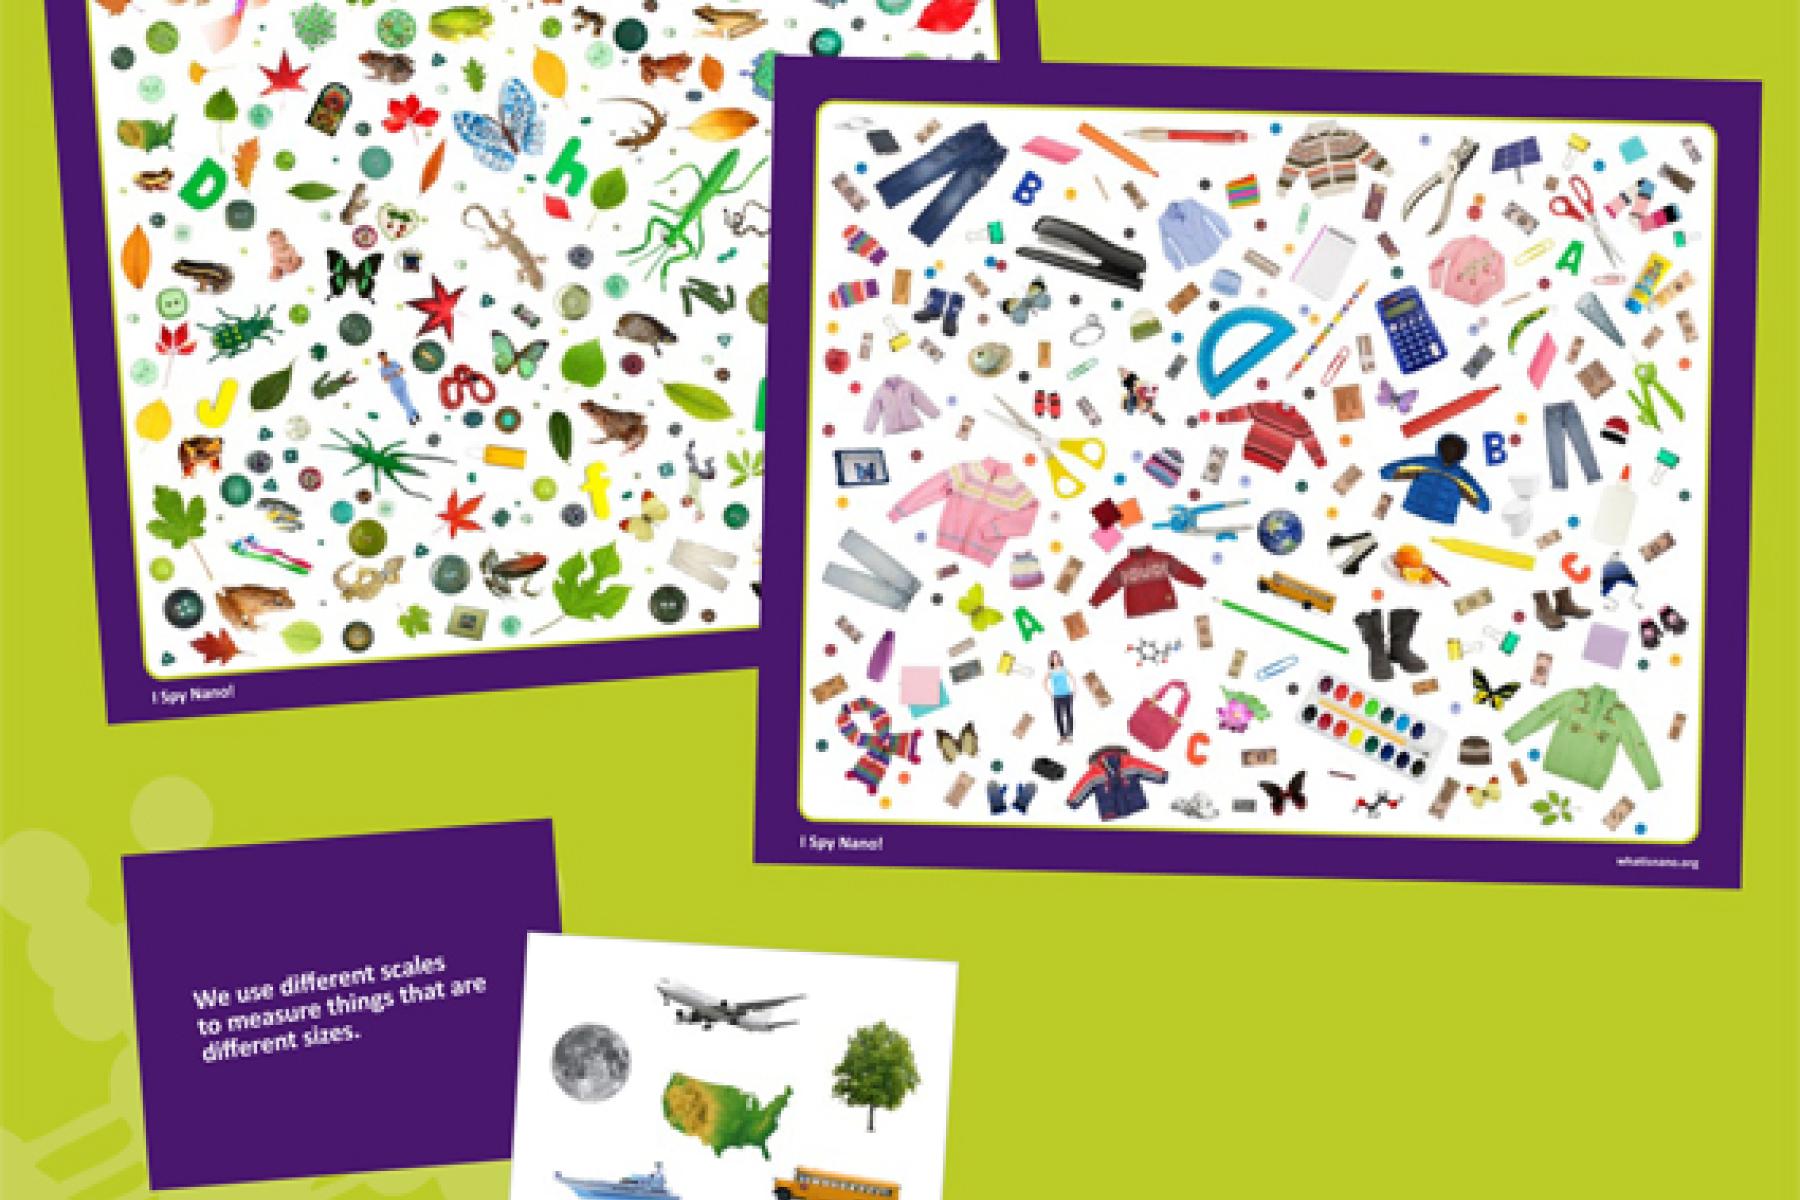 Photo of a large placemat with various items illustrated on the mat in a disorganized pattern 